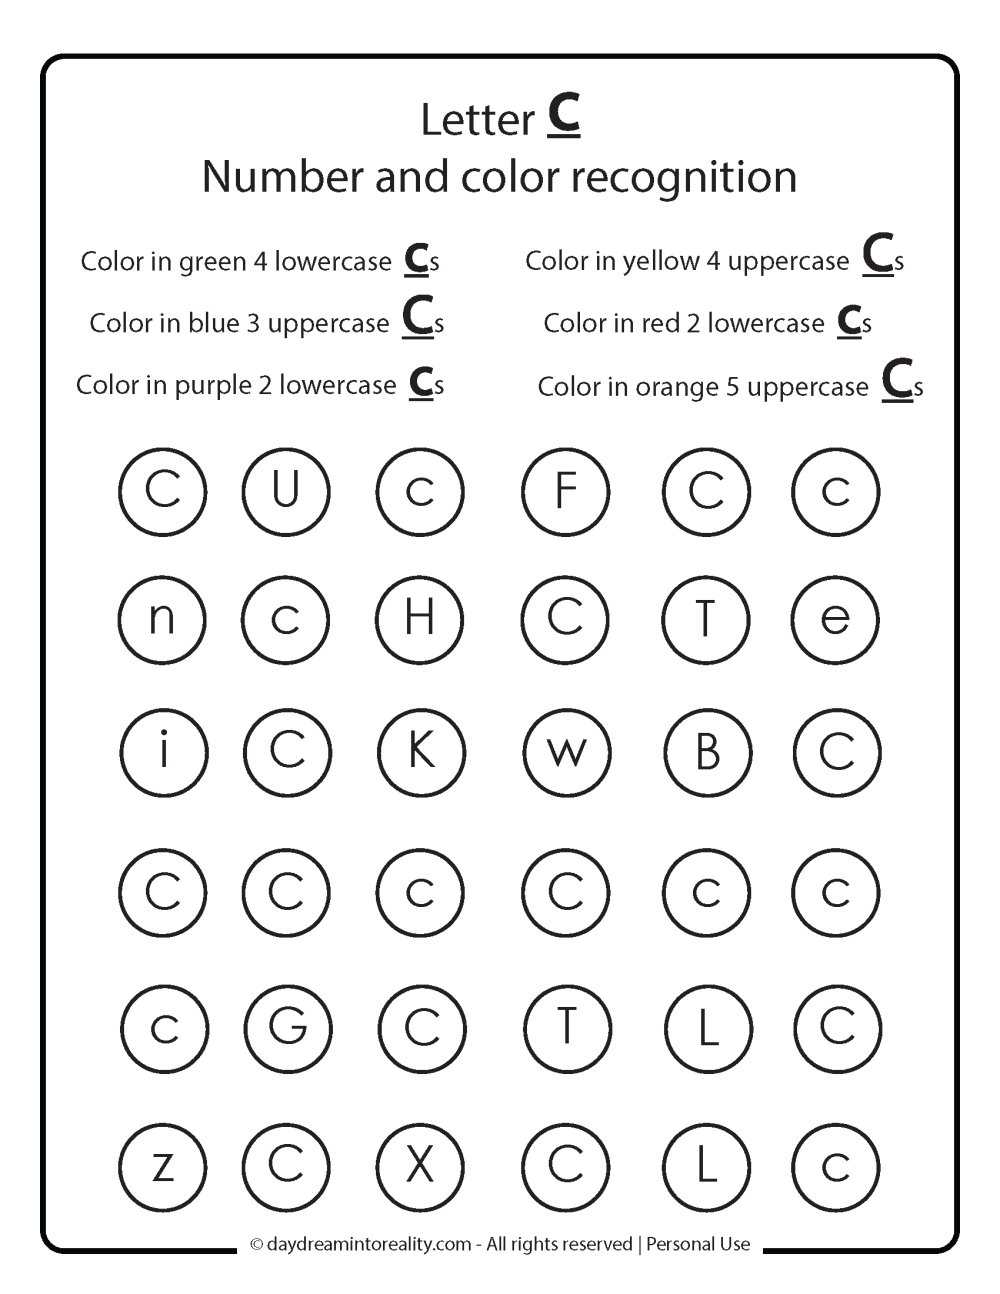 Letter C - color and number recognition. 